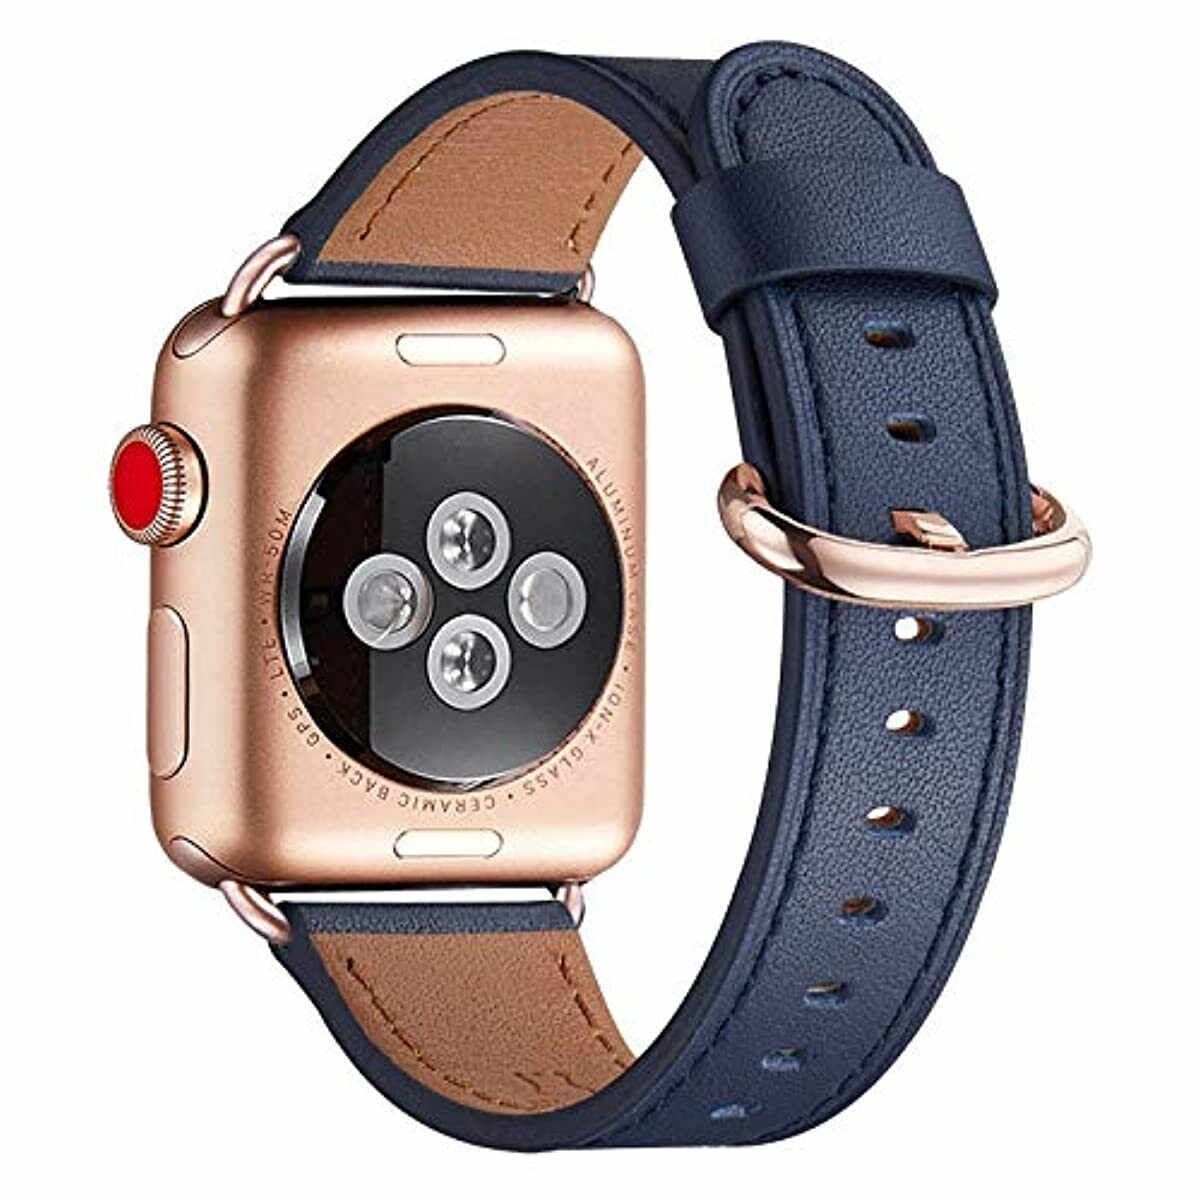 Genuine Leather Replacement Strap for Apple Watch 38 40 42mm Series 5 4 SE Band